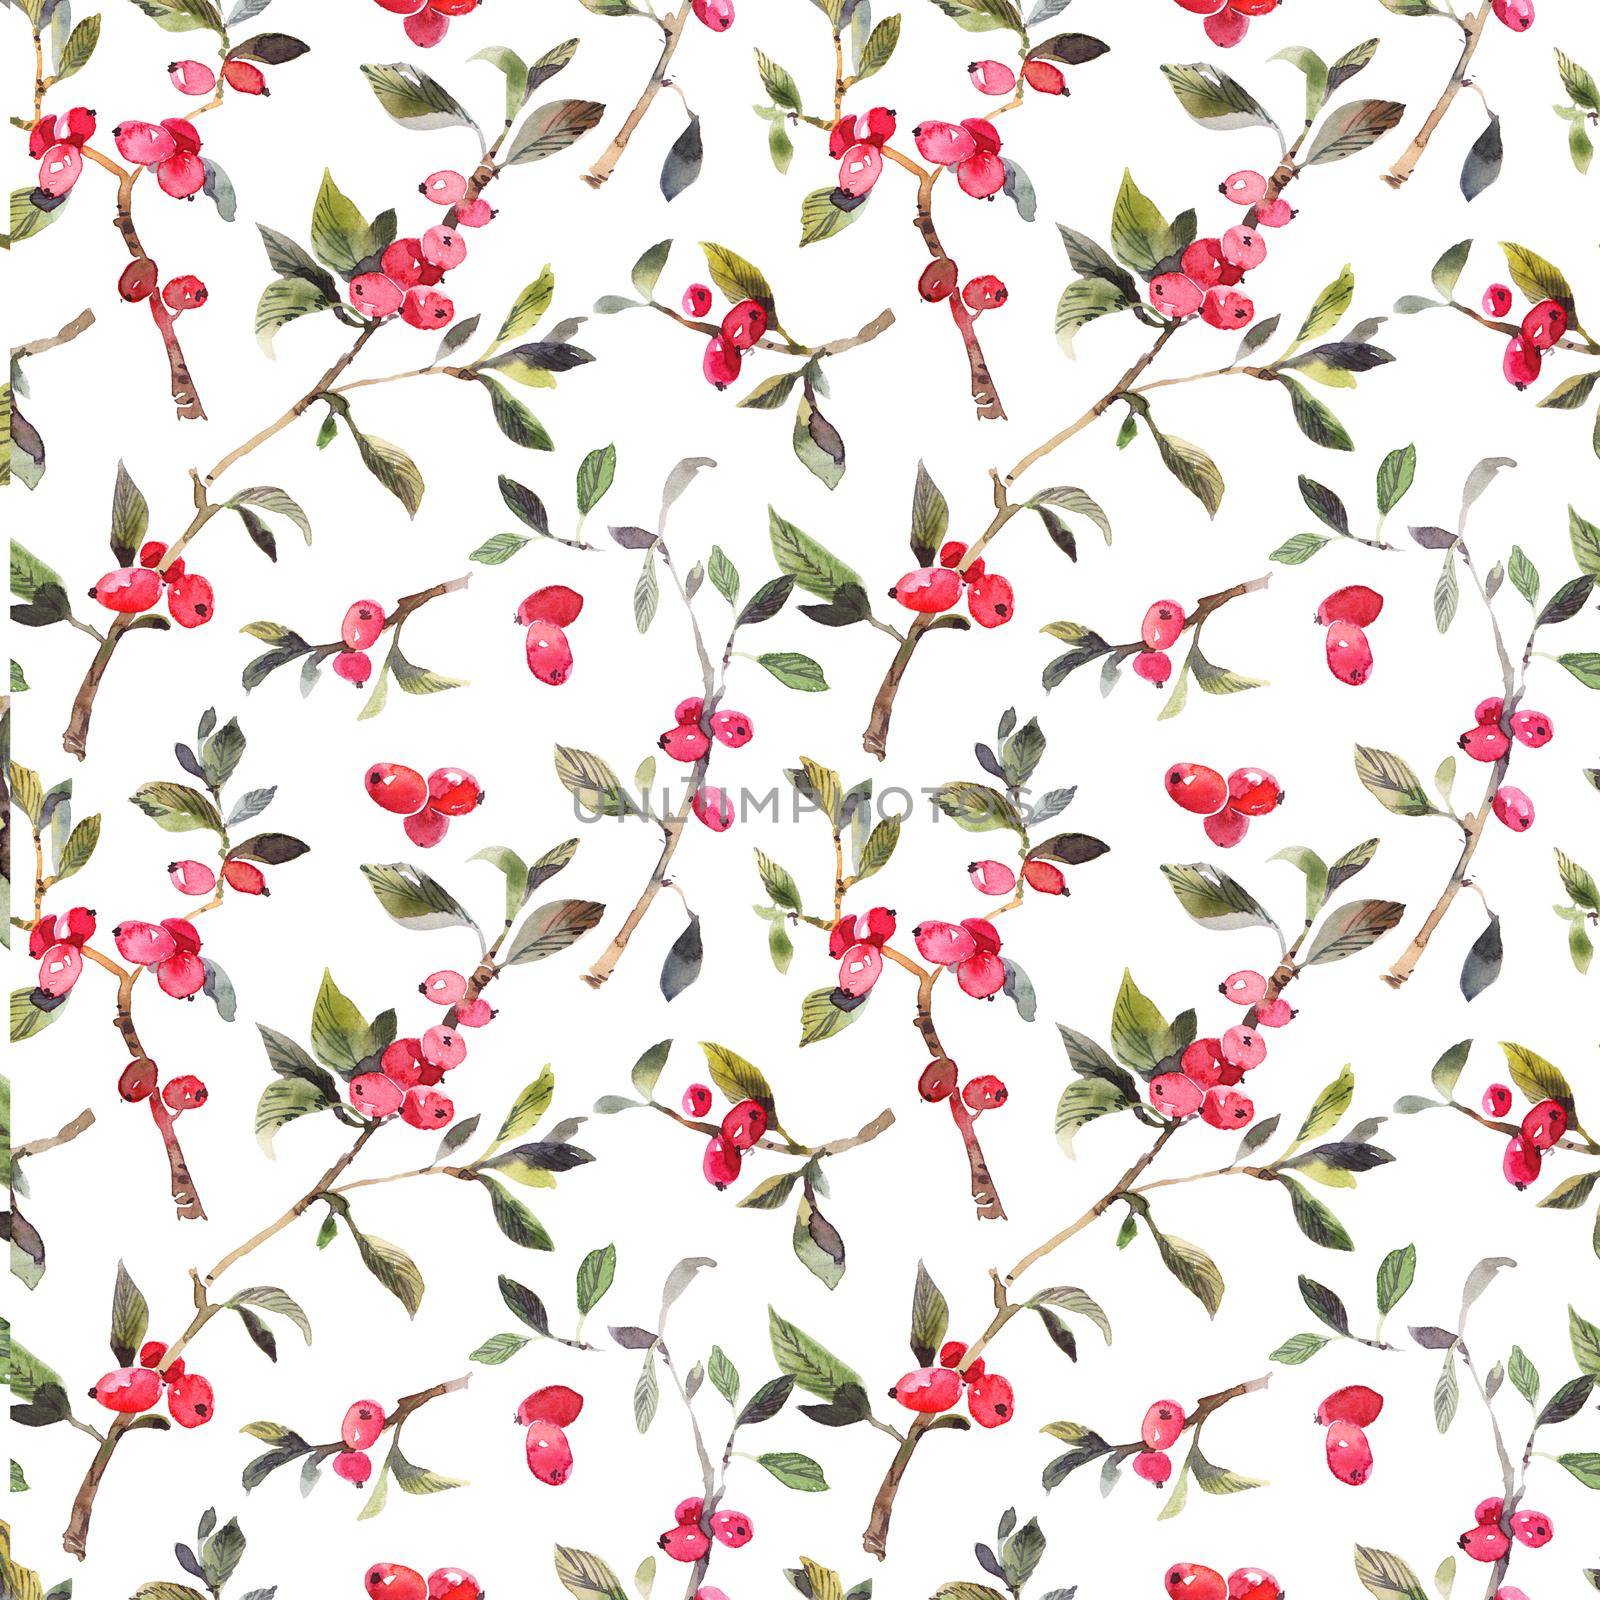 Watercolor botanical illustration of twig with red berries on white background. Seamless pattern.